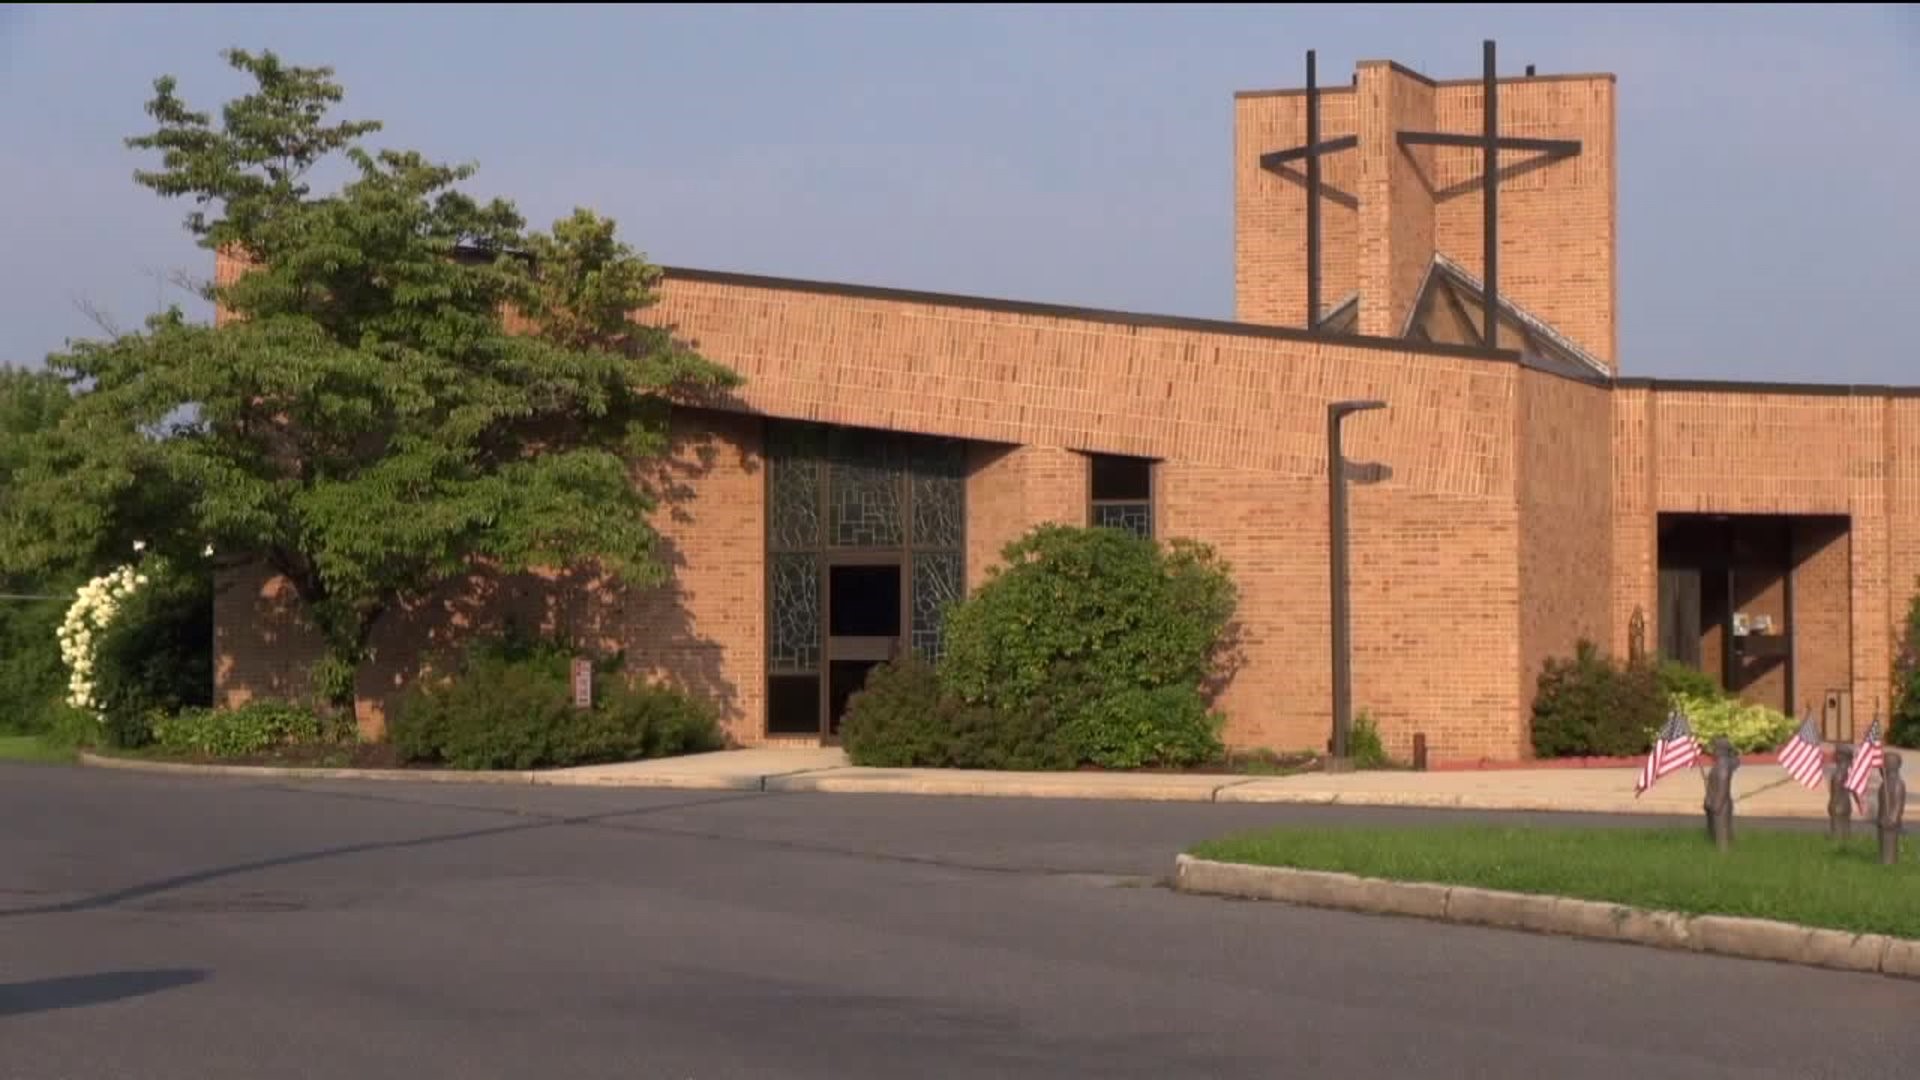 Grand Jury Report Claims Three Priests Committed Sexual Abuse Against Children at Same Church in Schuylkill County